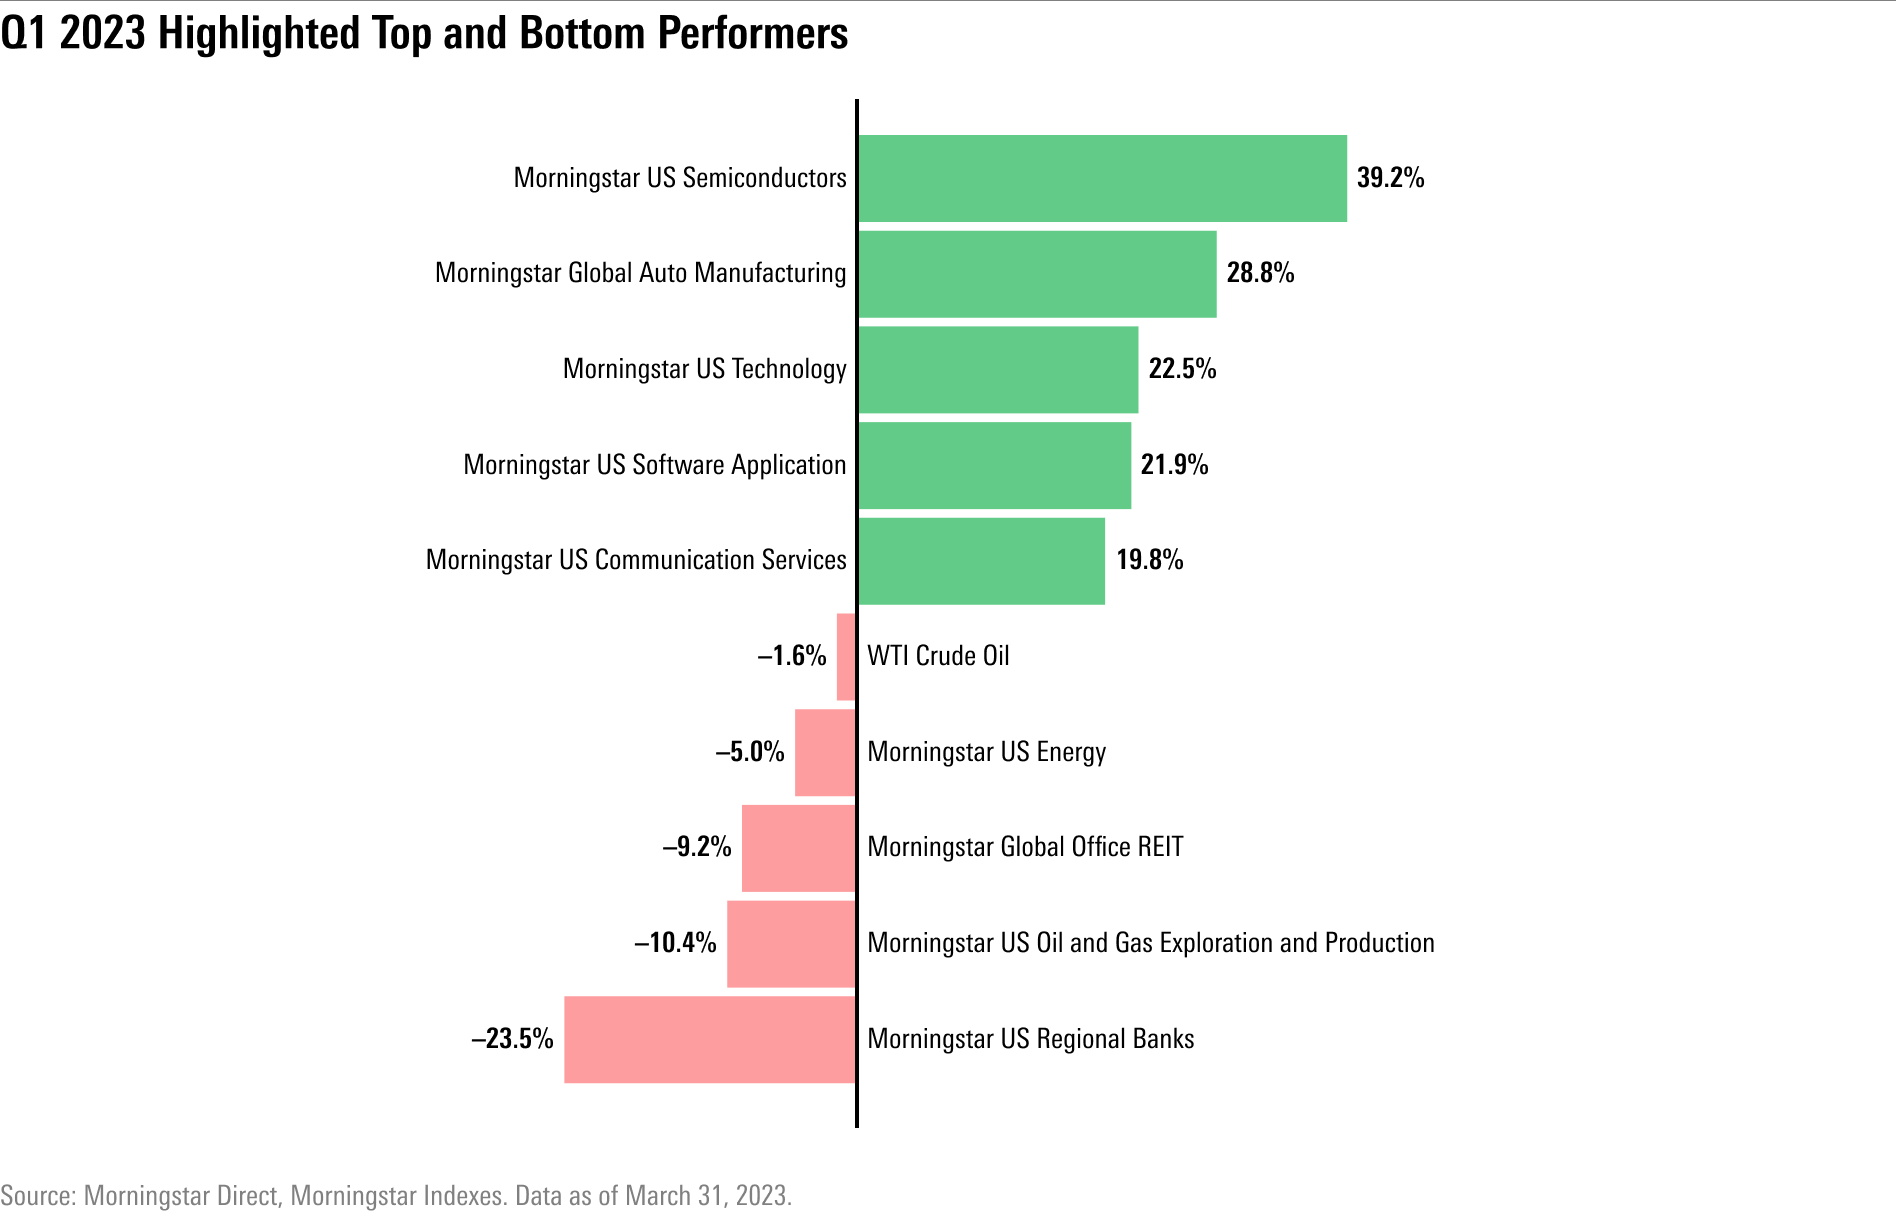 Bar chart showing selected top- and bottom-performing Morningstar Indexes.